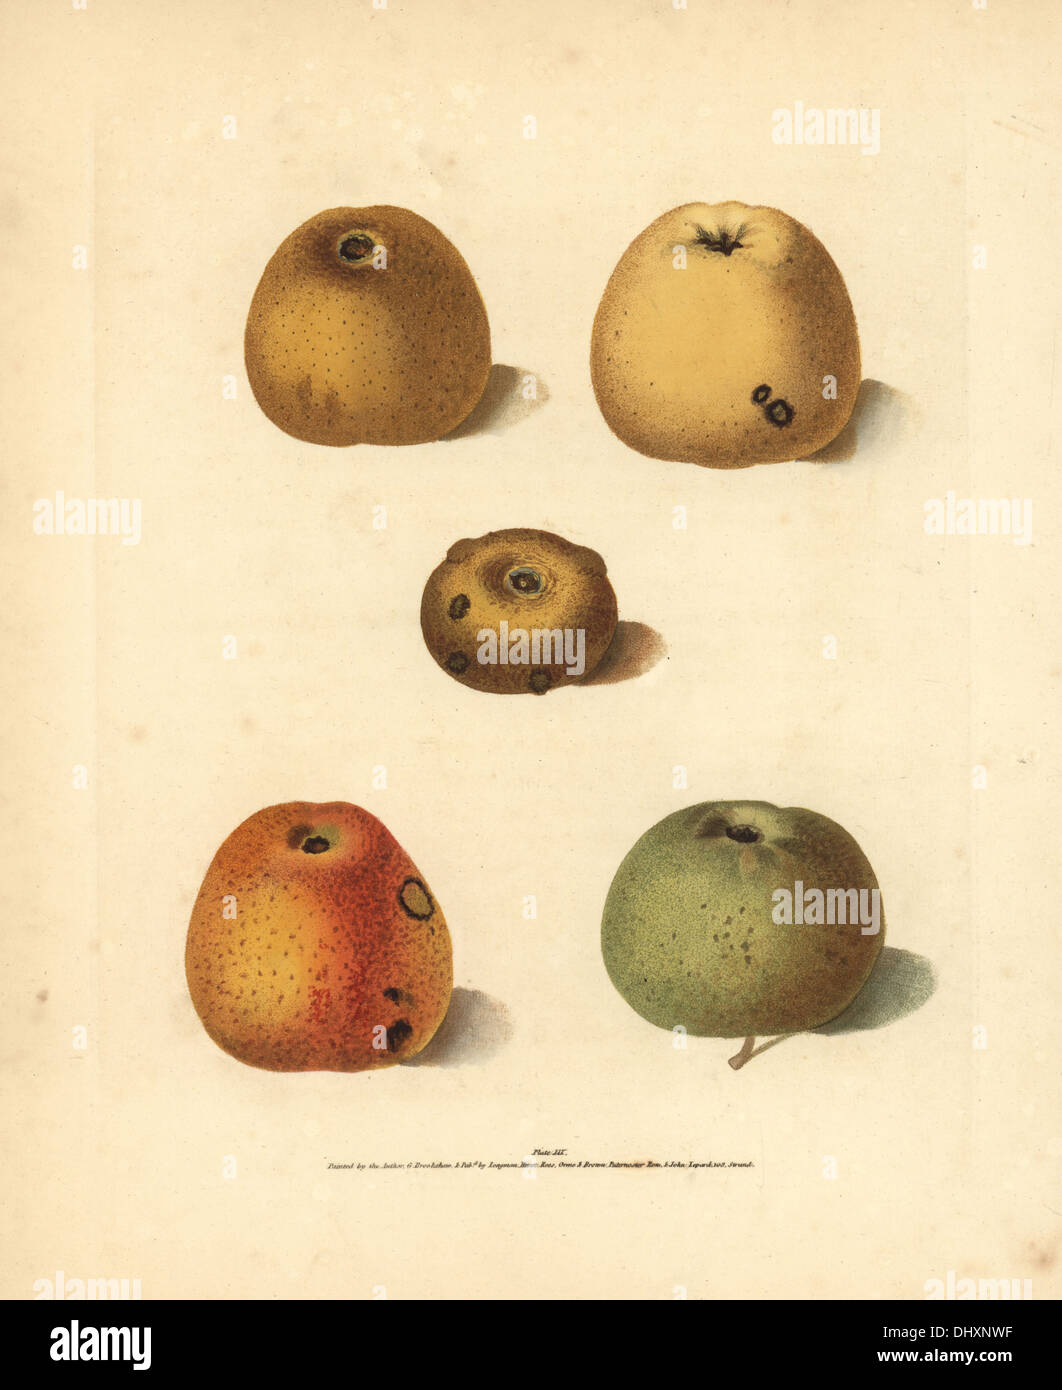 Apple varieties, Malus domestica: Pippins and Golden Knob. Stock Photo